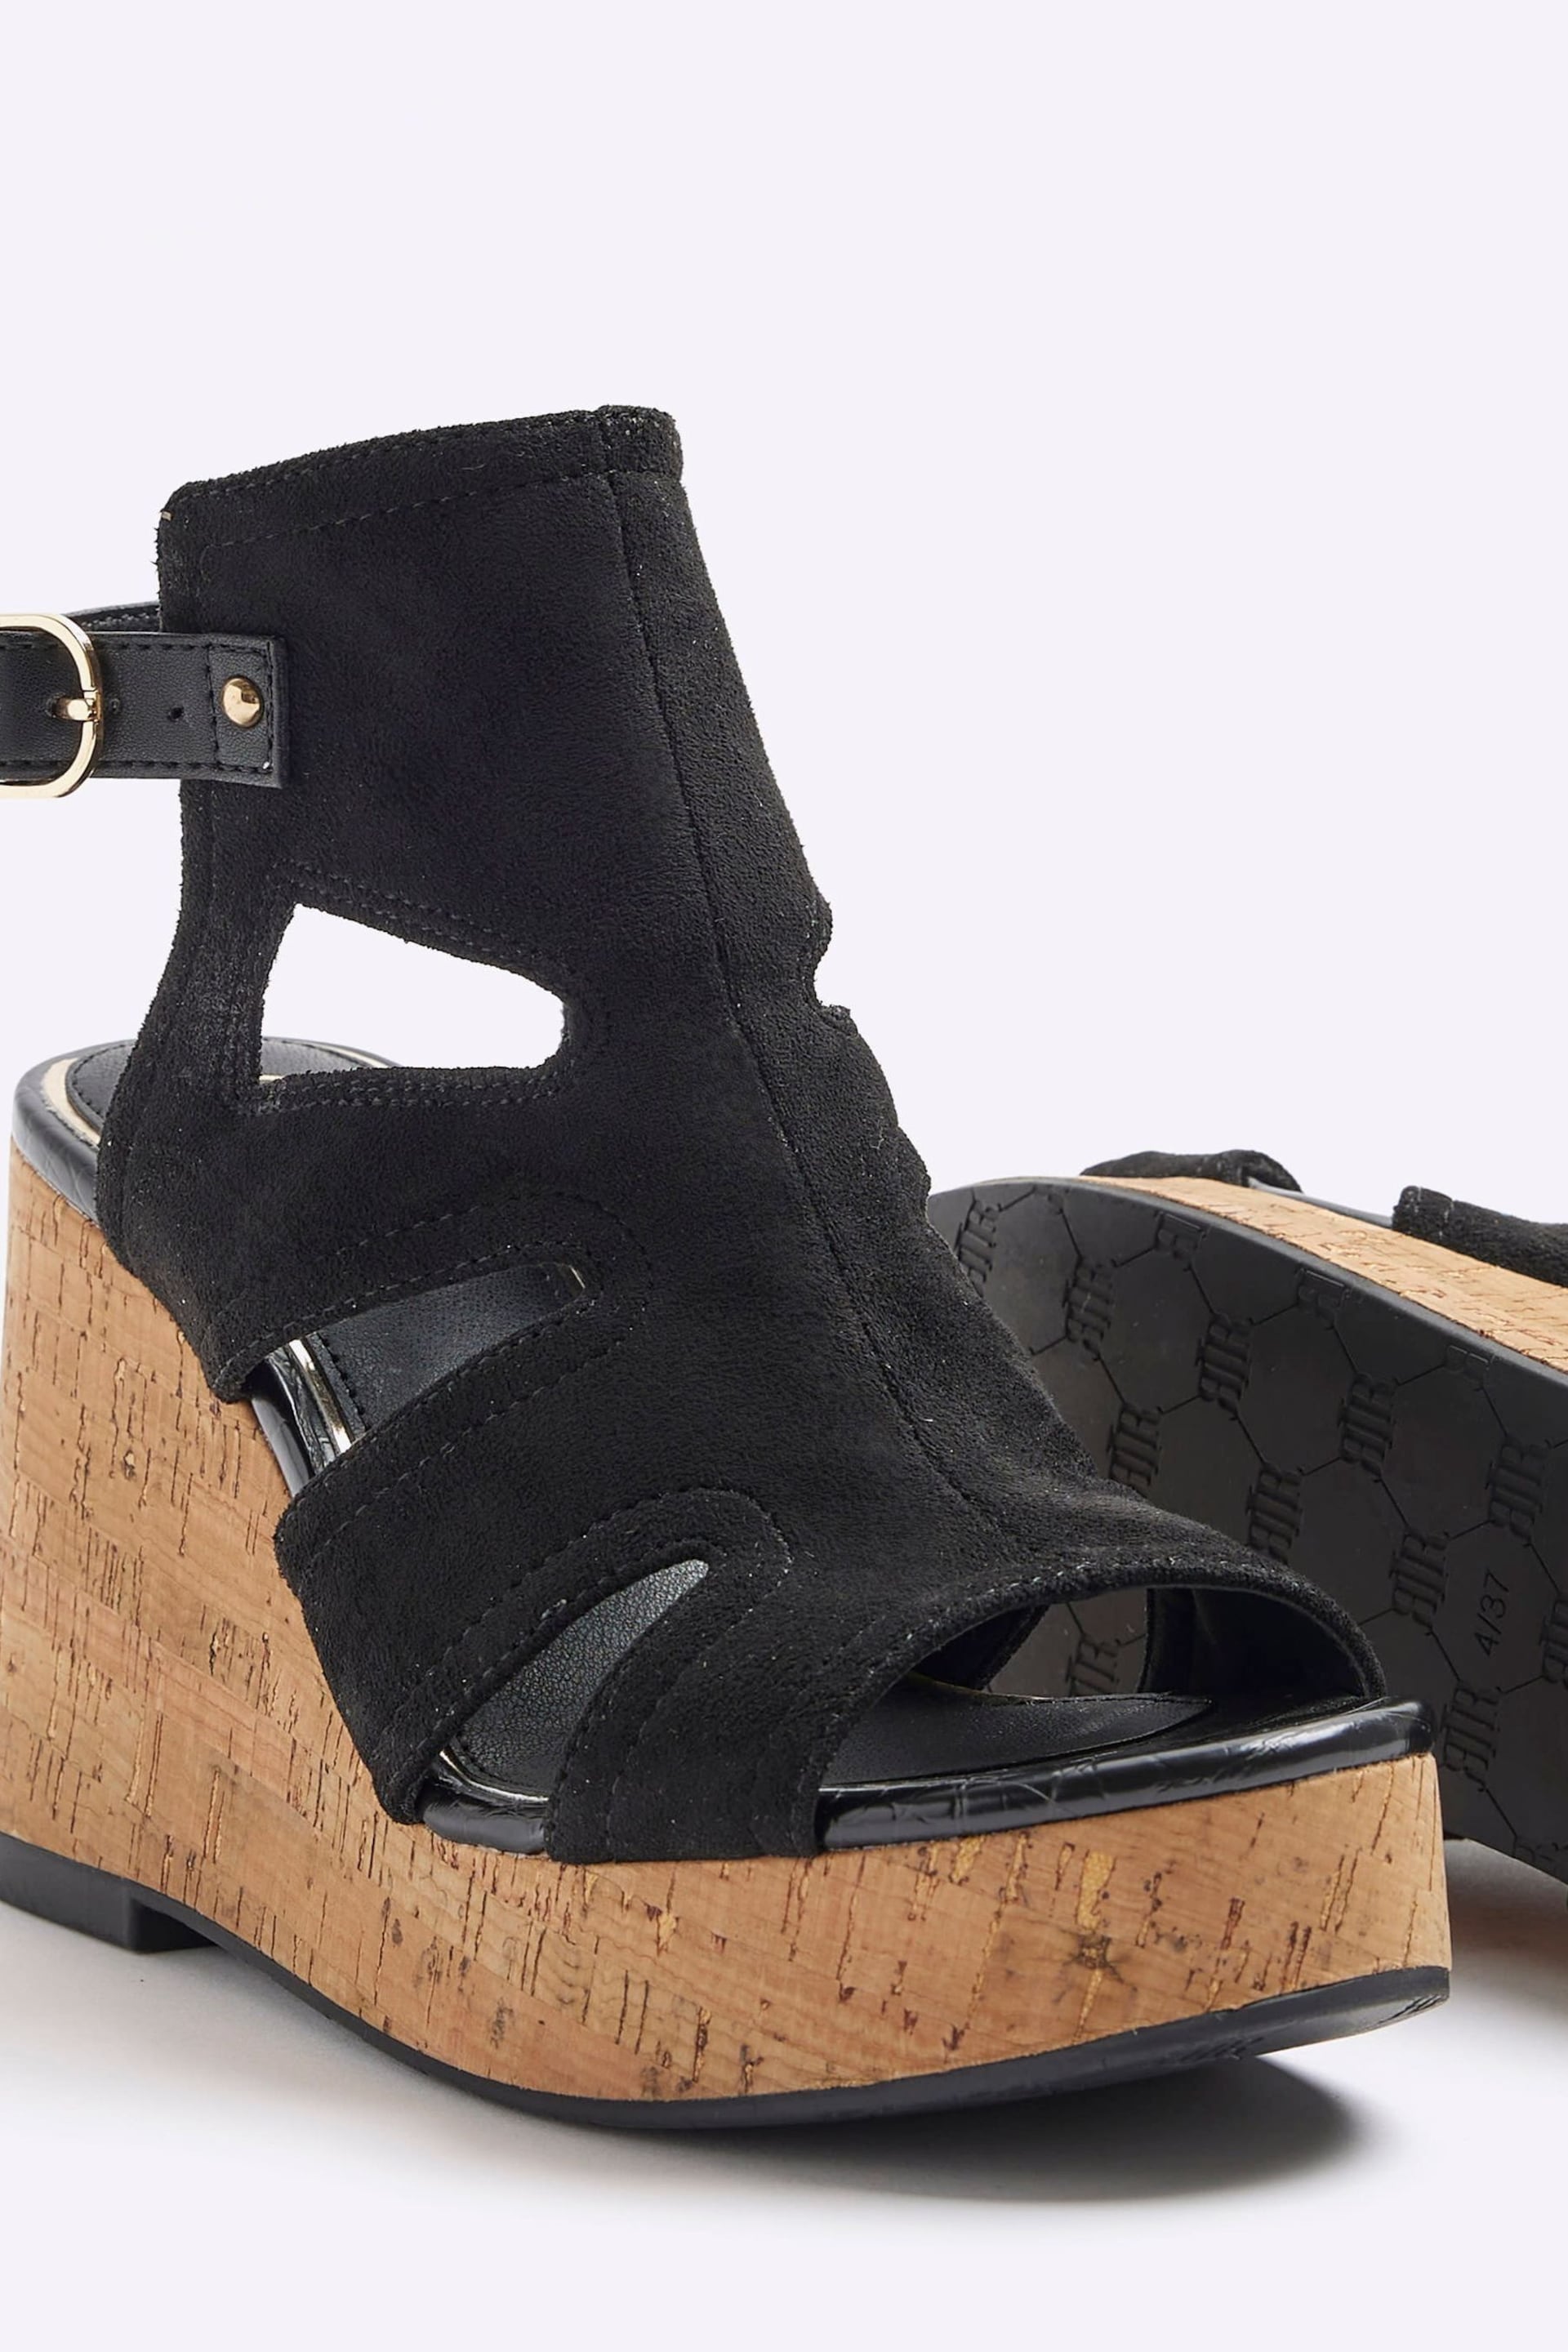 River Island Black Cut-Out Wedge Shoes Boots - Image 4 of 4